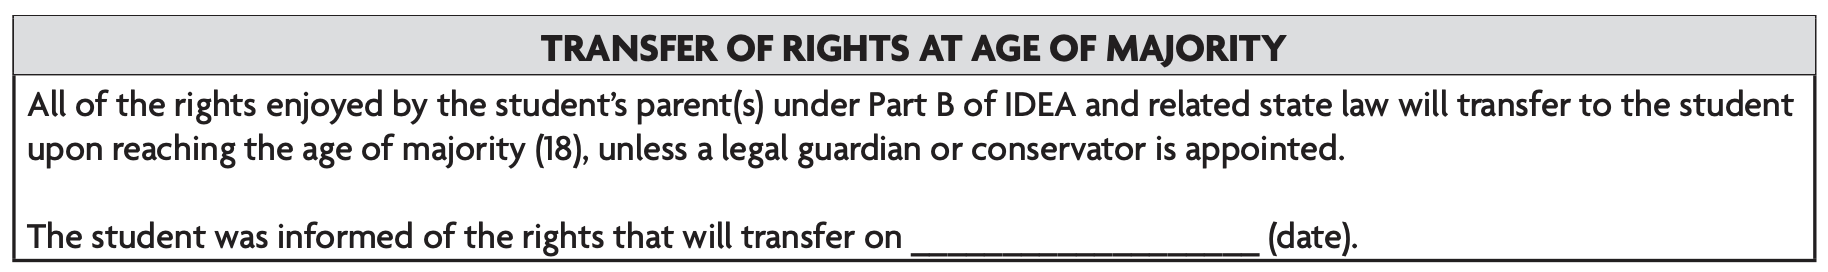 Image text: All of the rights enjoyed by the student's parent(s) under Part B of IDEA and related state law will transfer to the student upon reaching the age of majority (18), unless a legal guardian or conservator is appointed. The student was informed of the rights that will transfer on _______ (date). 